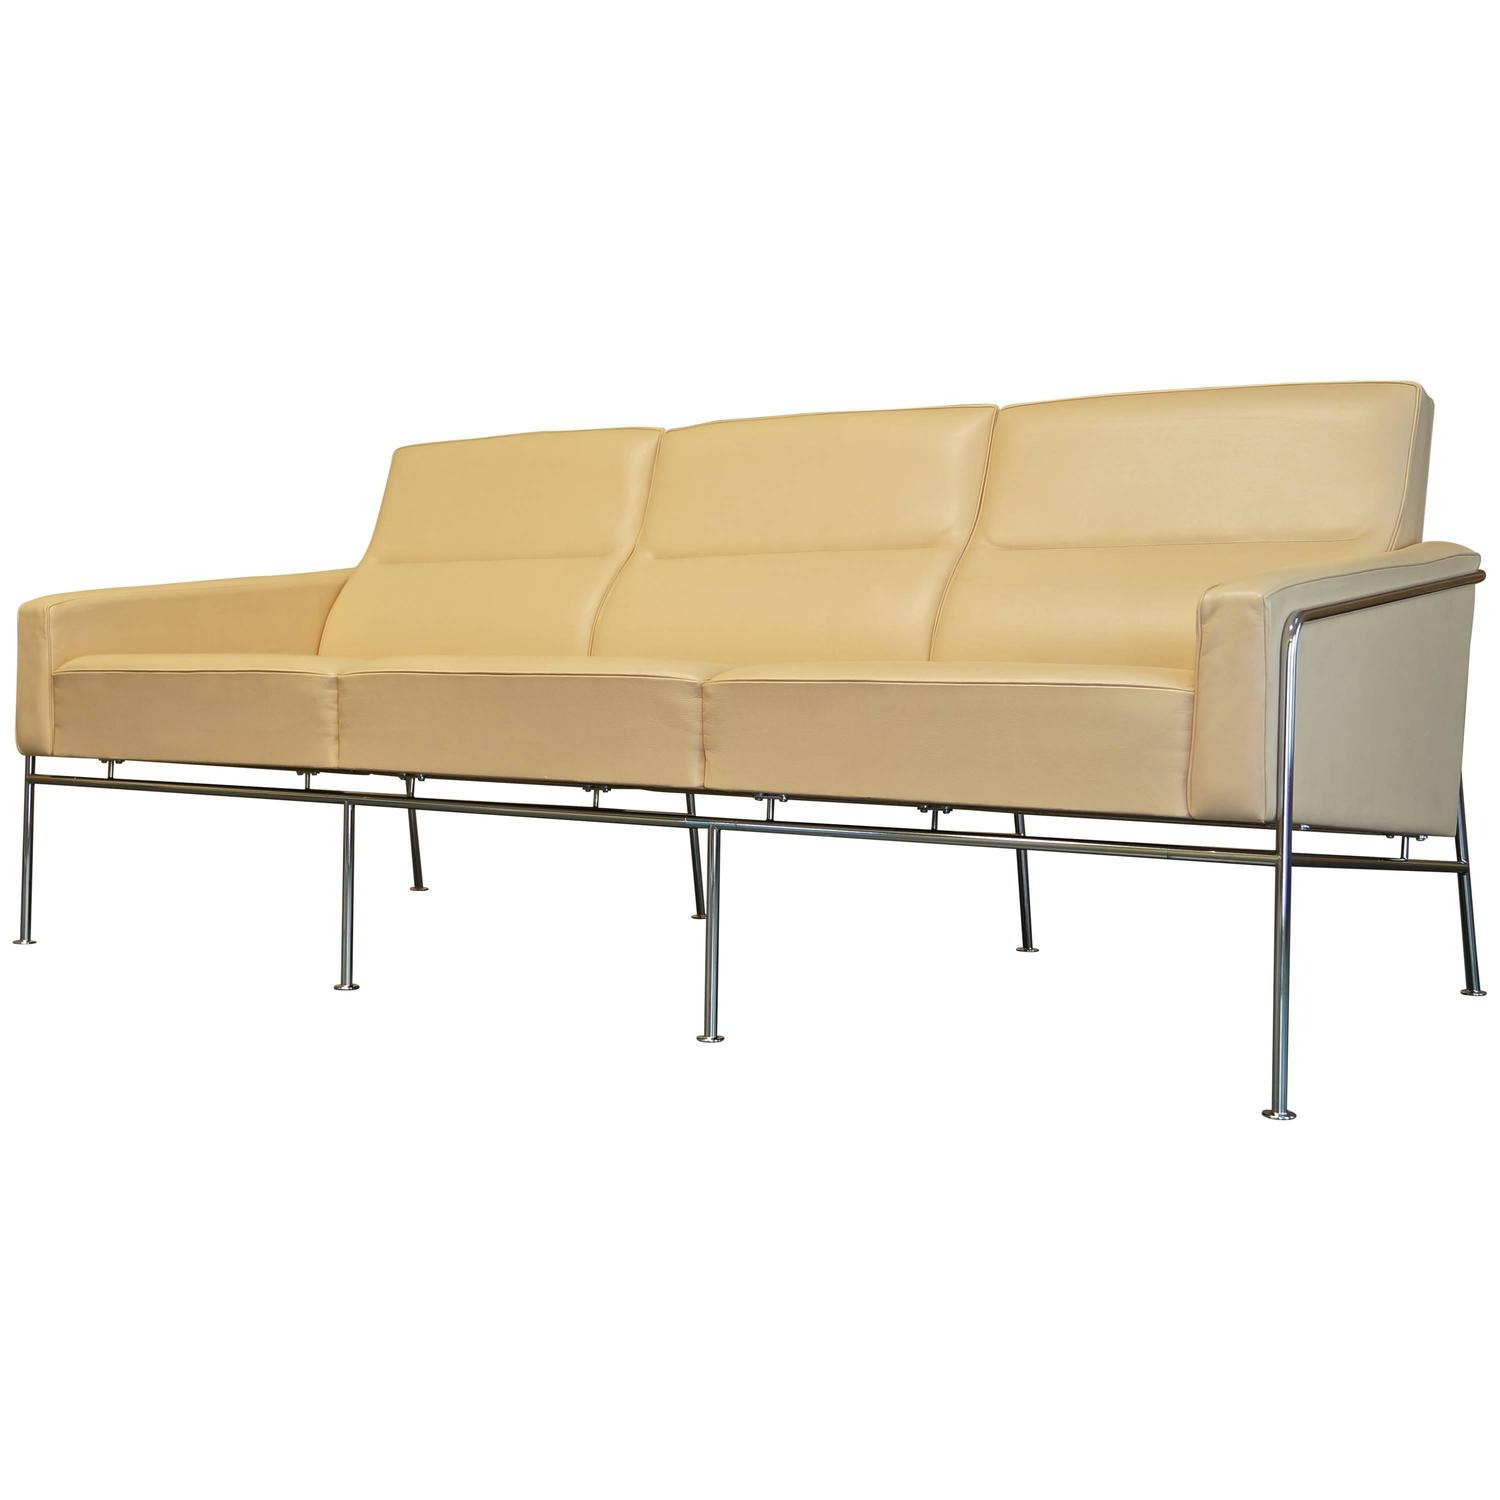 Leather Sofa by Arne Jacobsen at 1stdibs